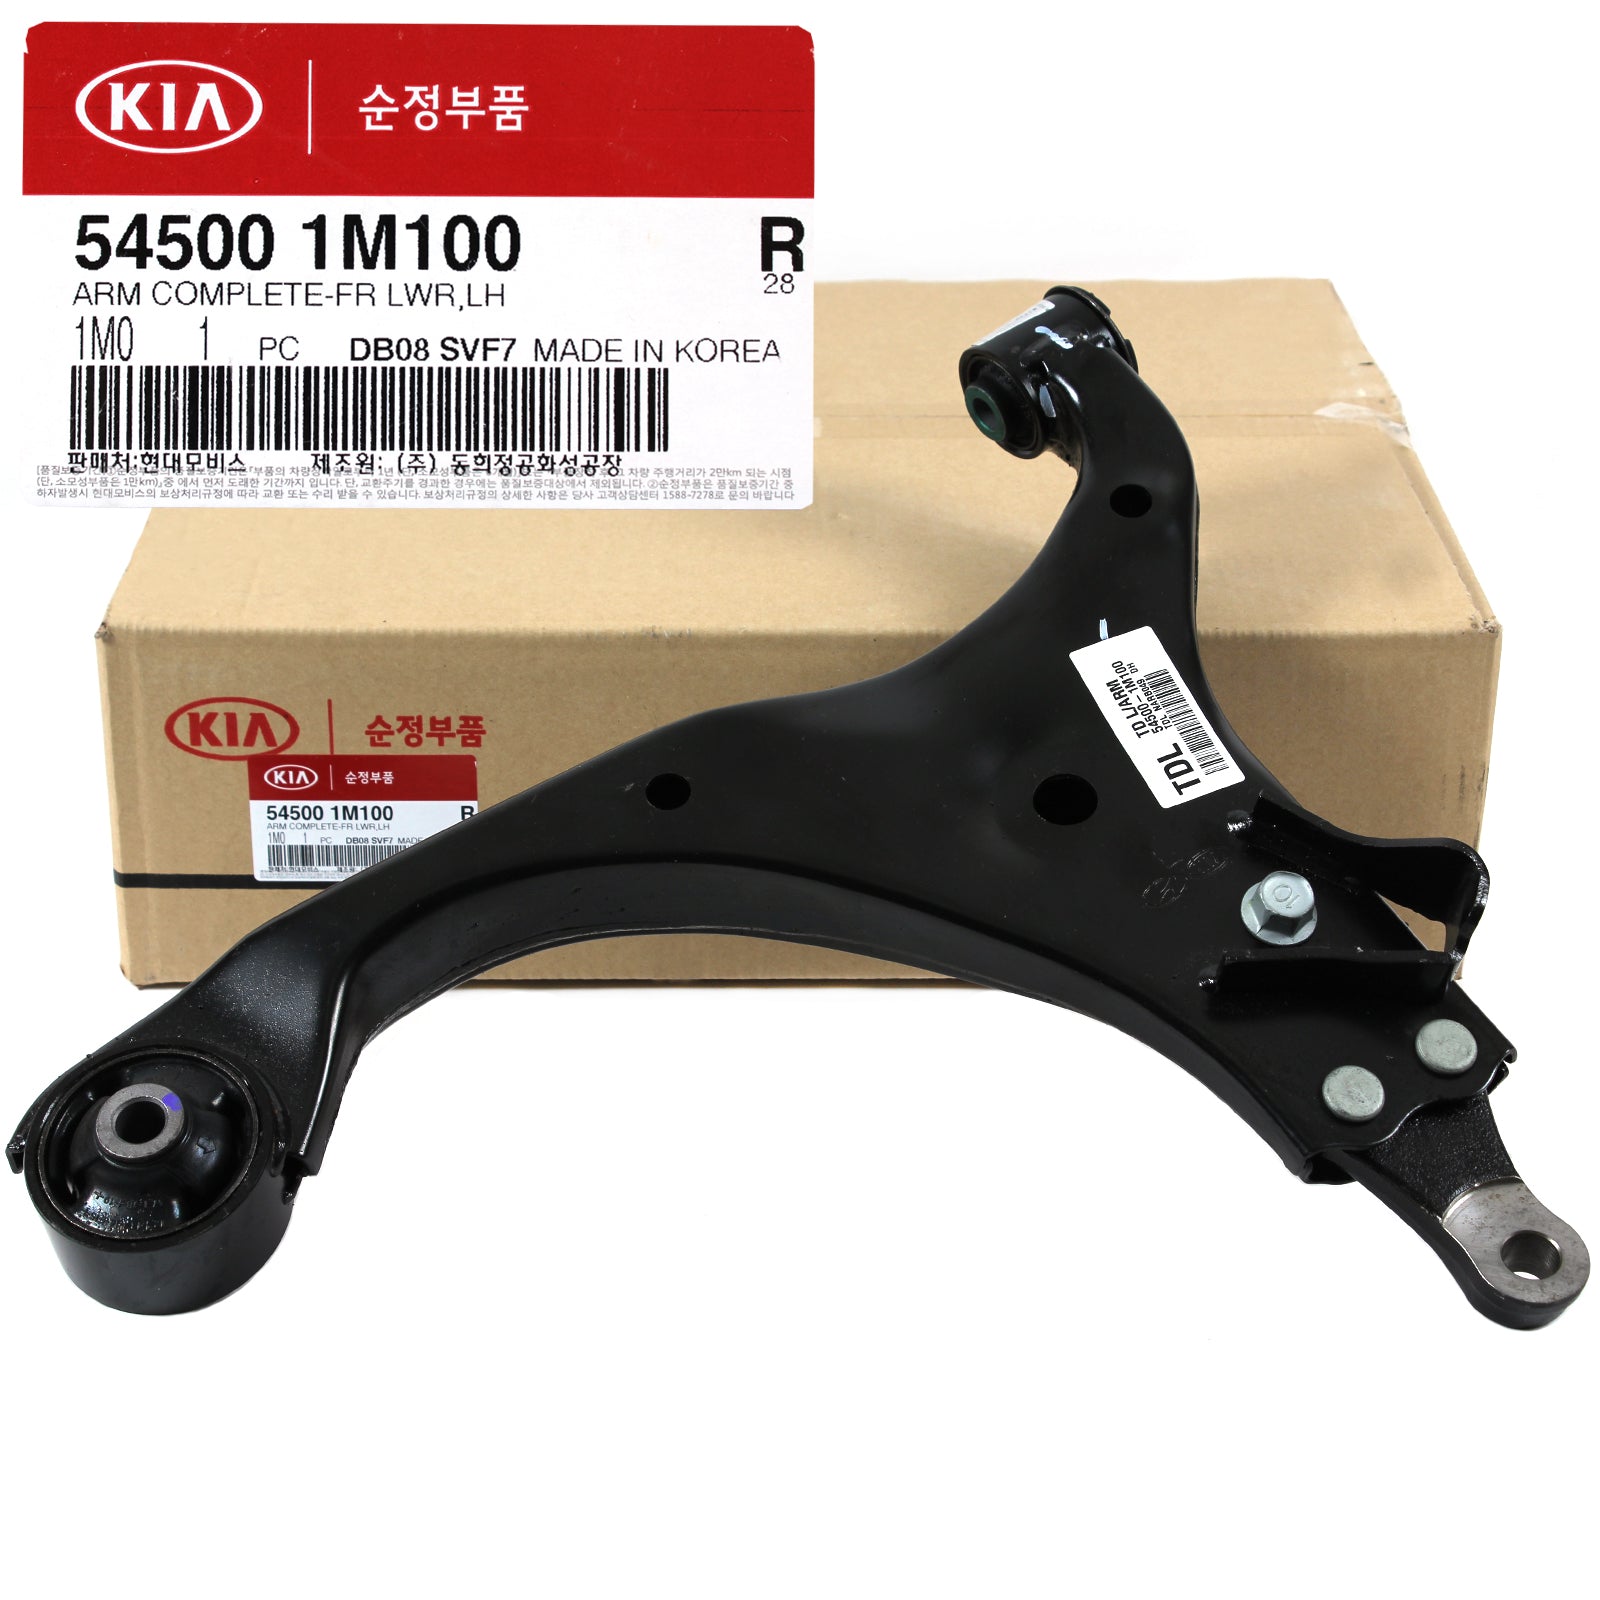 GENUINE Control Arm FRONT LOWER LEFT for 10-13 Kia Forte & Forte Koup 545001M100